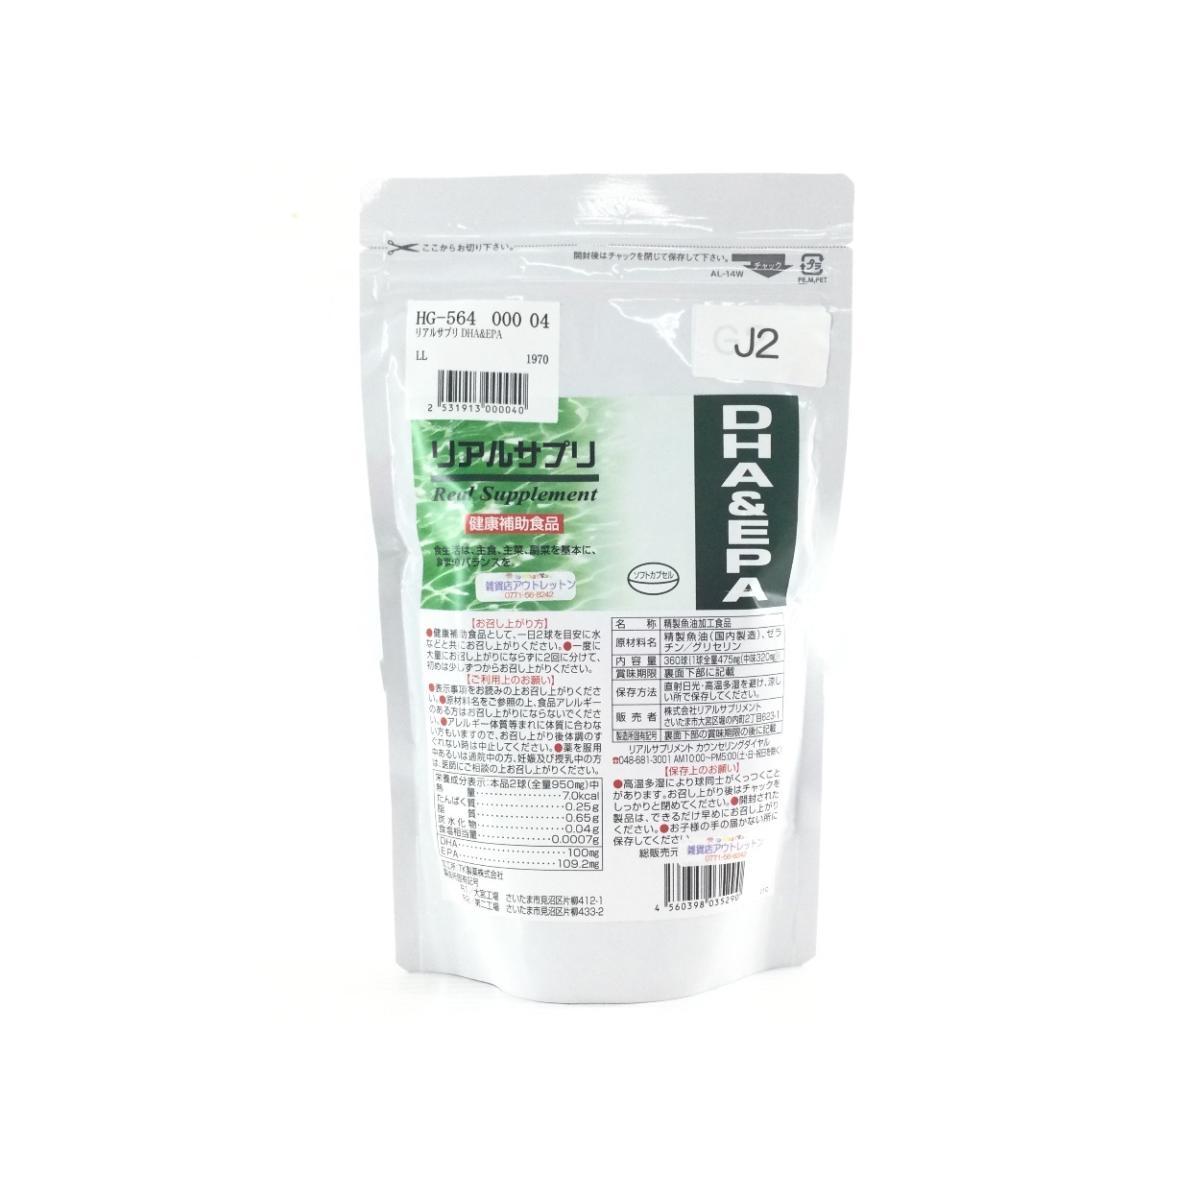  real supplement DHA&EPA health assistance food soft Capsule approximately 180 day minute postage 250 jpy 